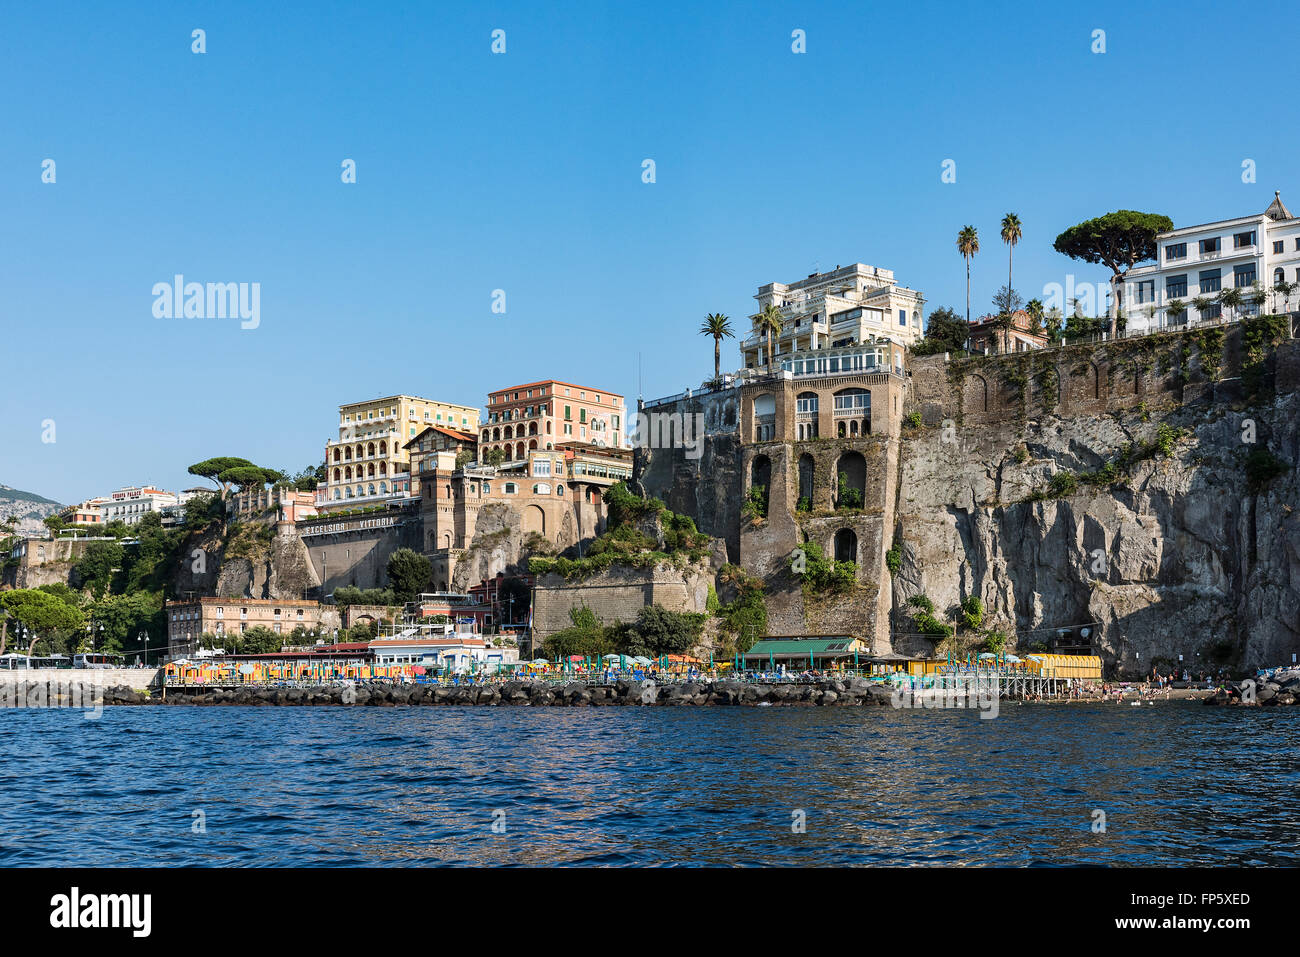 Town of Sorrento as seen from the water, Campania, Italy Stock Photo